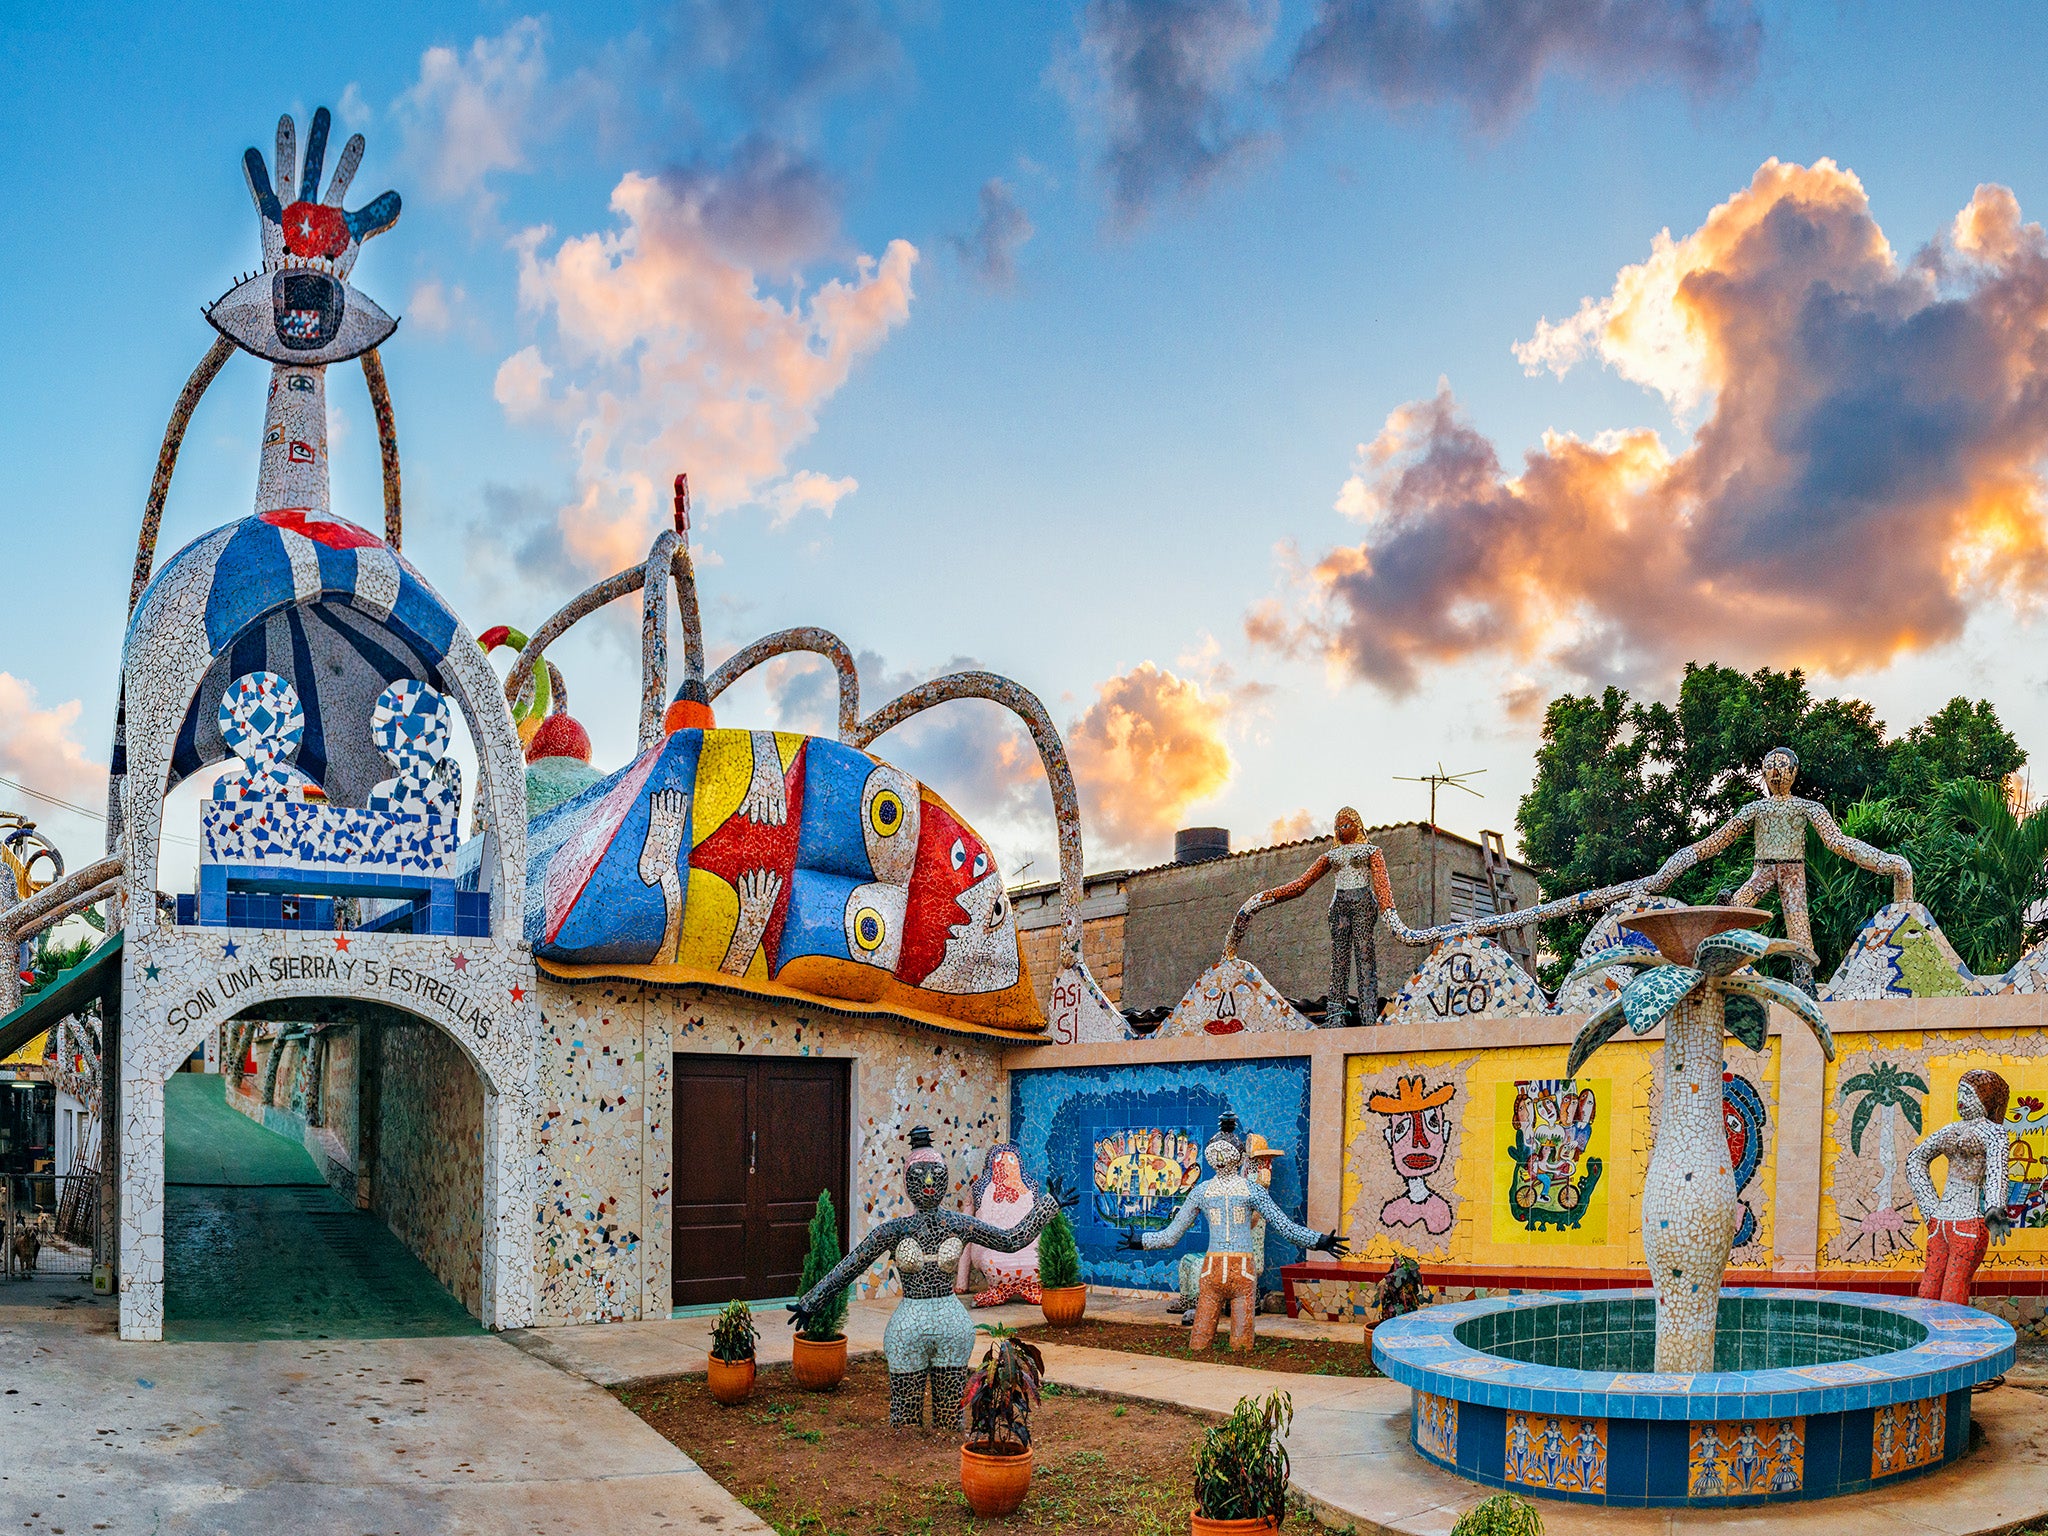 The park is inspired by Spanish artists like Gaudi and Picasso, with Caribbean Cuban flavour